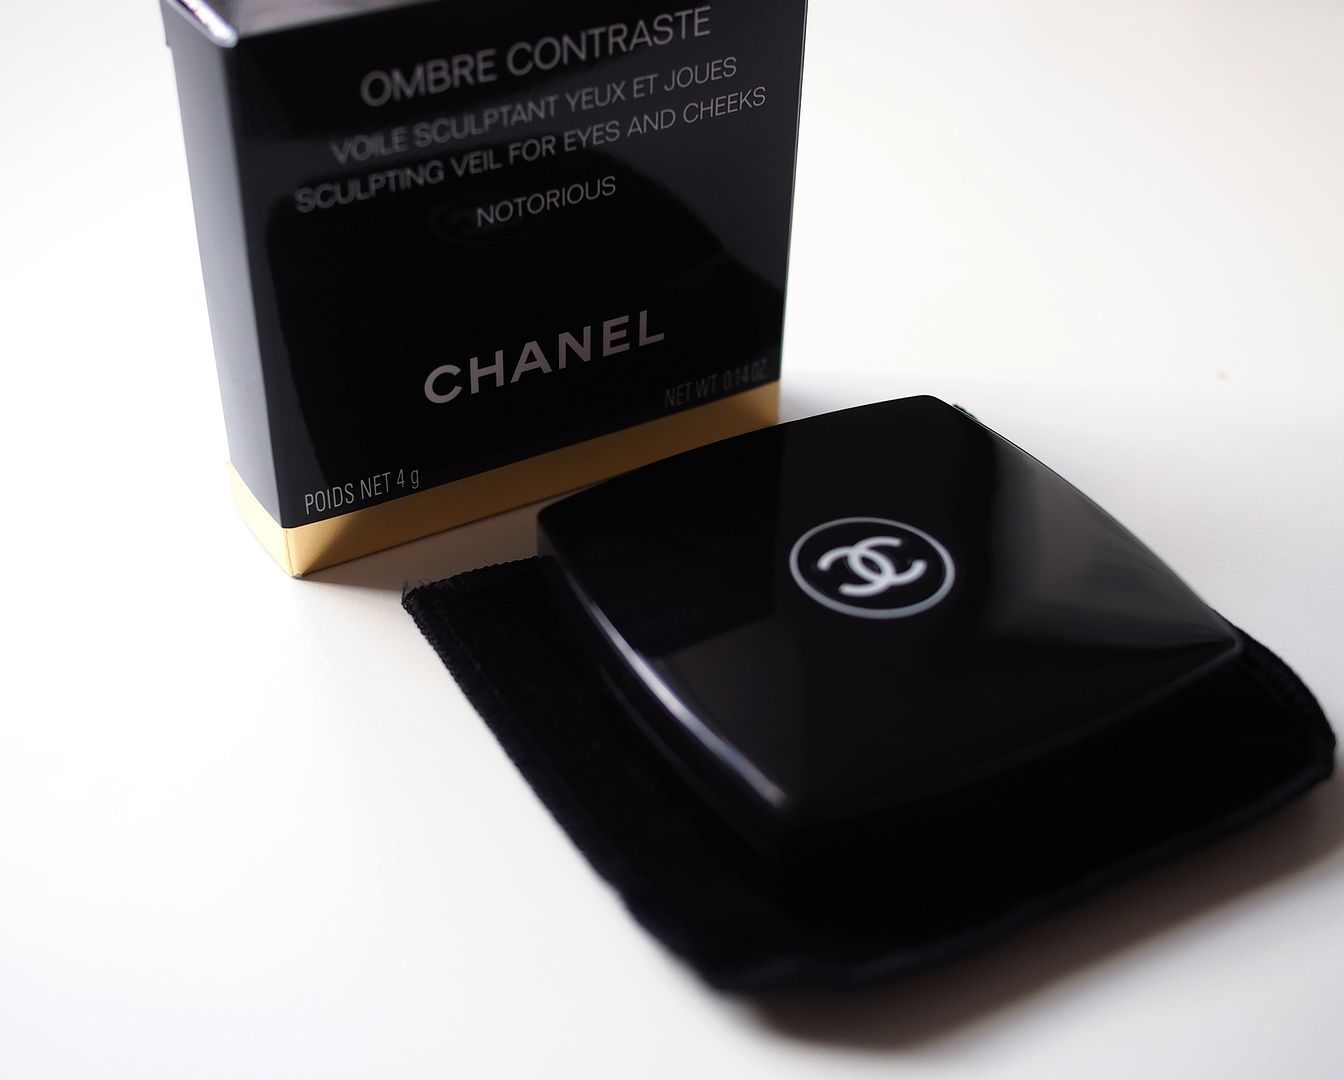 Chanel Packaging